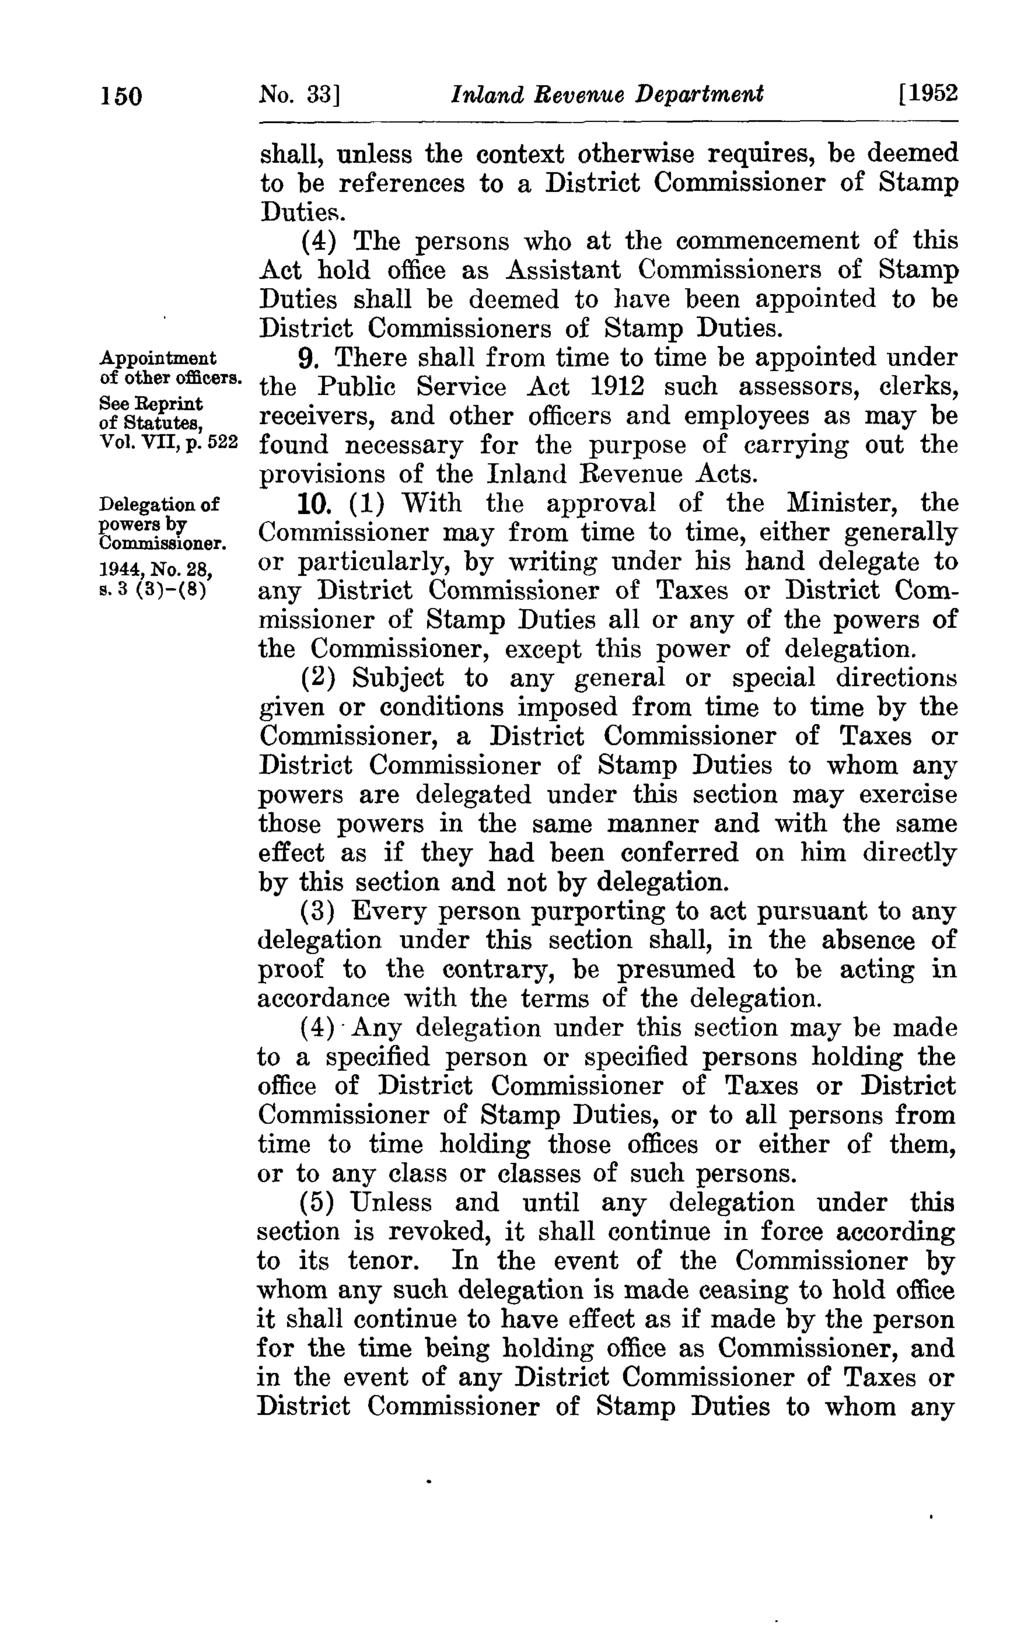 150 No. 33] Inland Revenue Department [1952 Appointment of other officers. See Reprint of Statutes, Vol. VII, p. 522 Delegation of powers by Commissioner. 1944, No. 28, s.